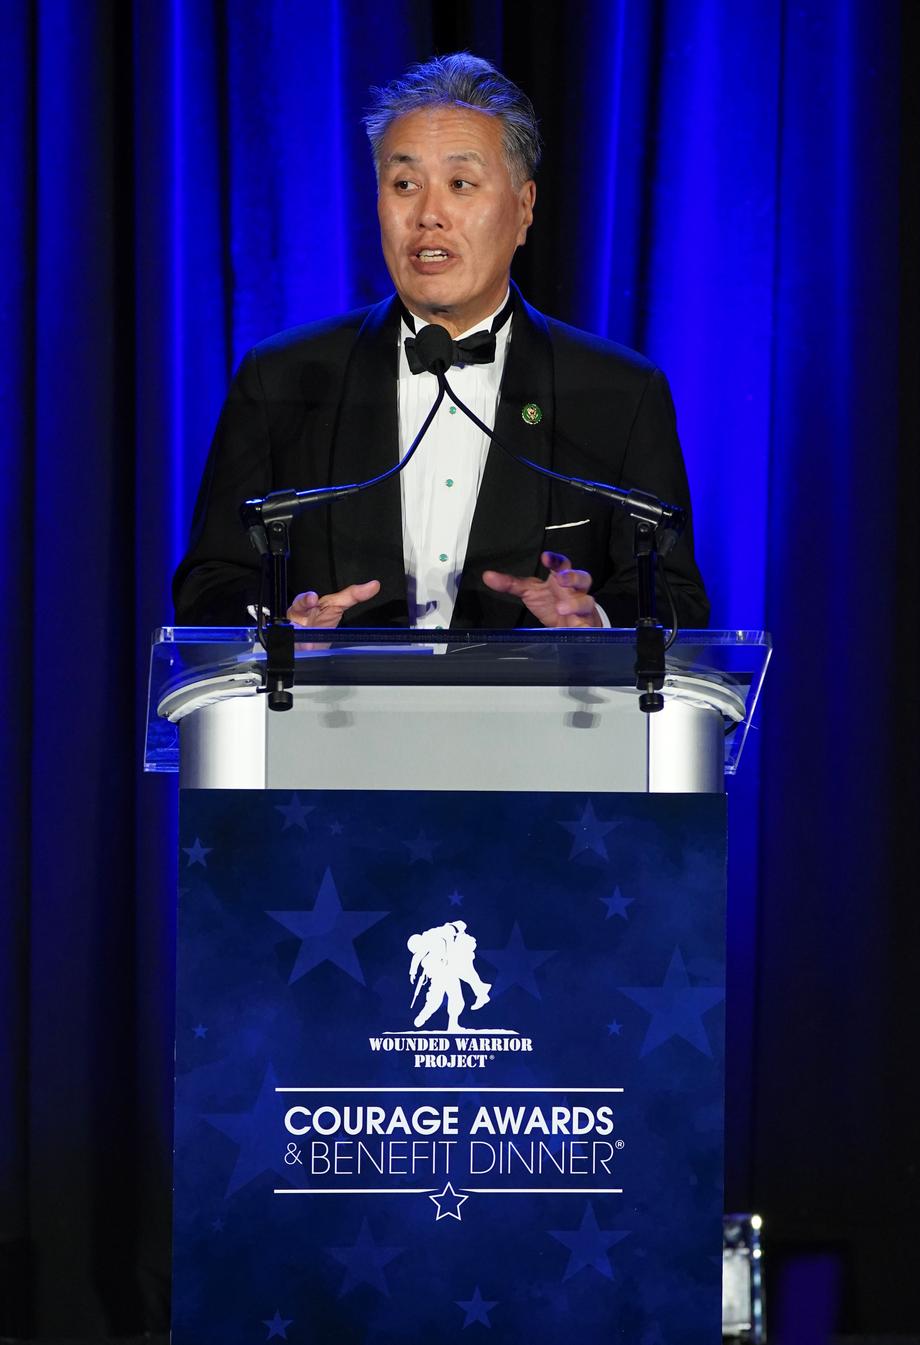 Wounded Warrior Project Legislator of the Year Image